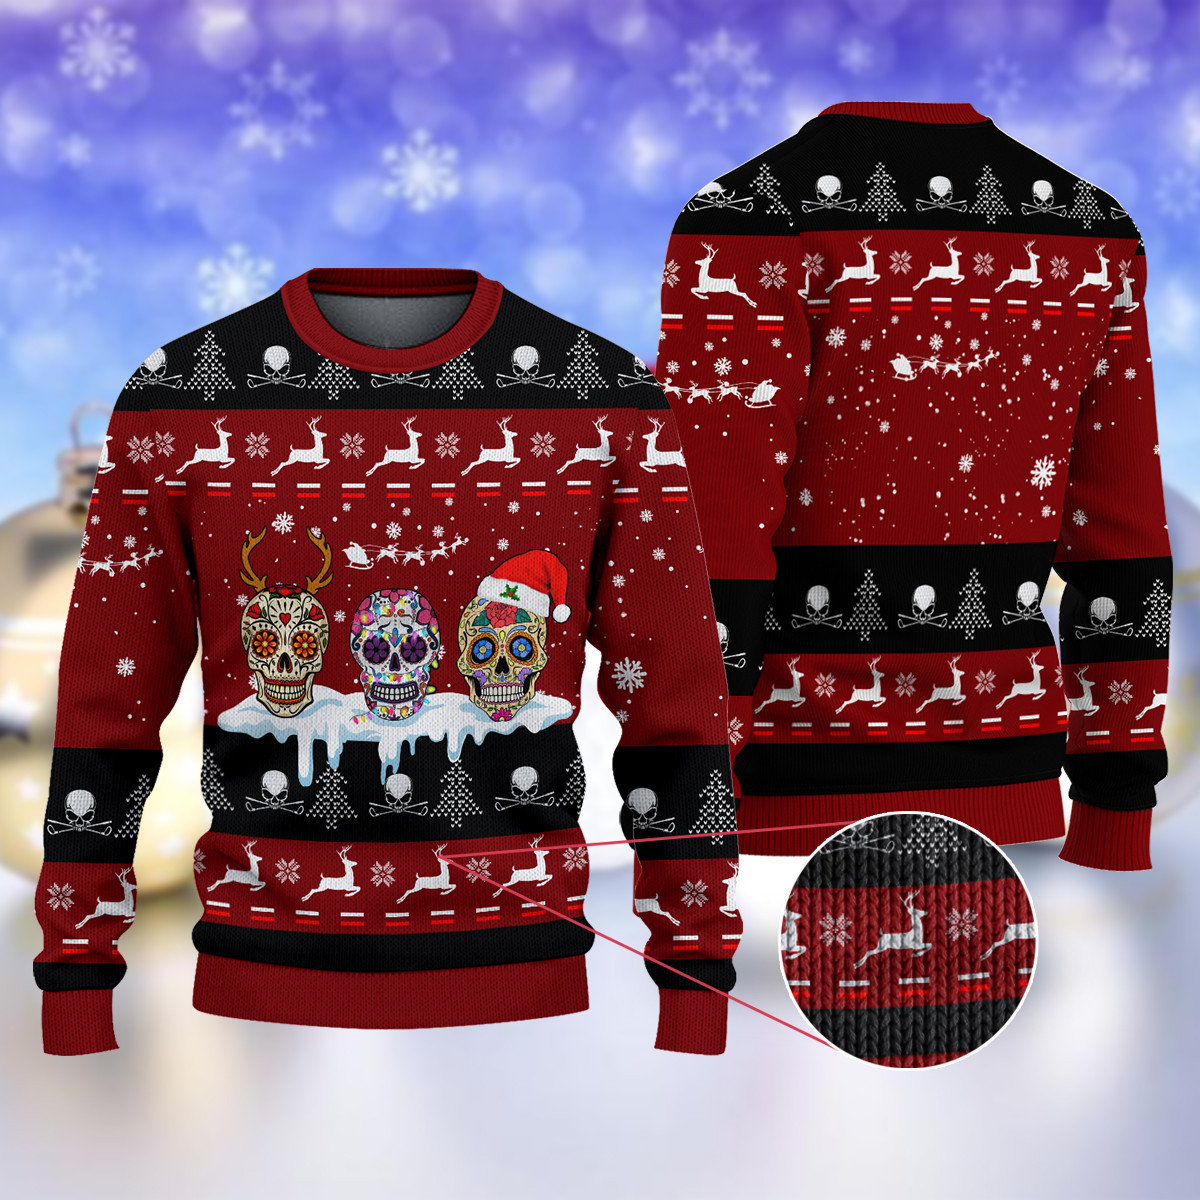 Golf Sugar Skull Ugly Red Christmas Sweater Ugly Sweater For Men Women Holiday Sweater